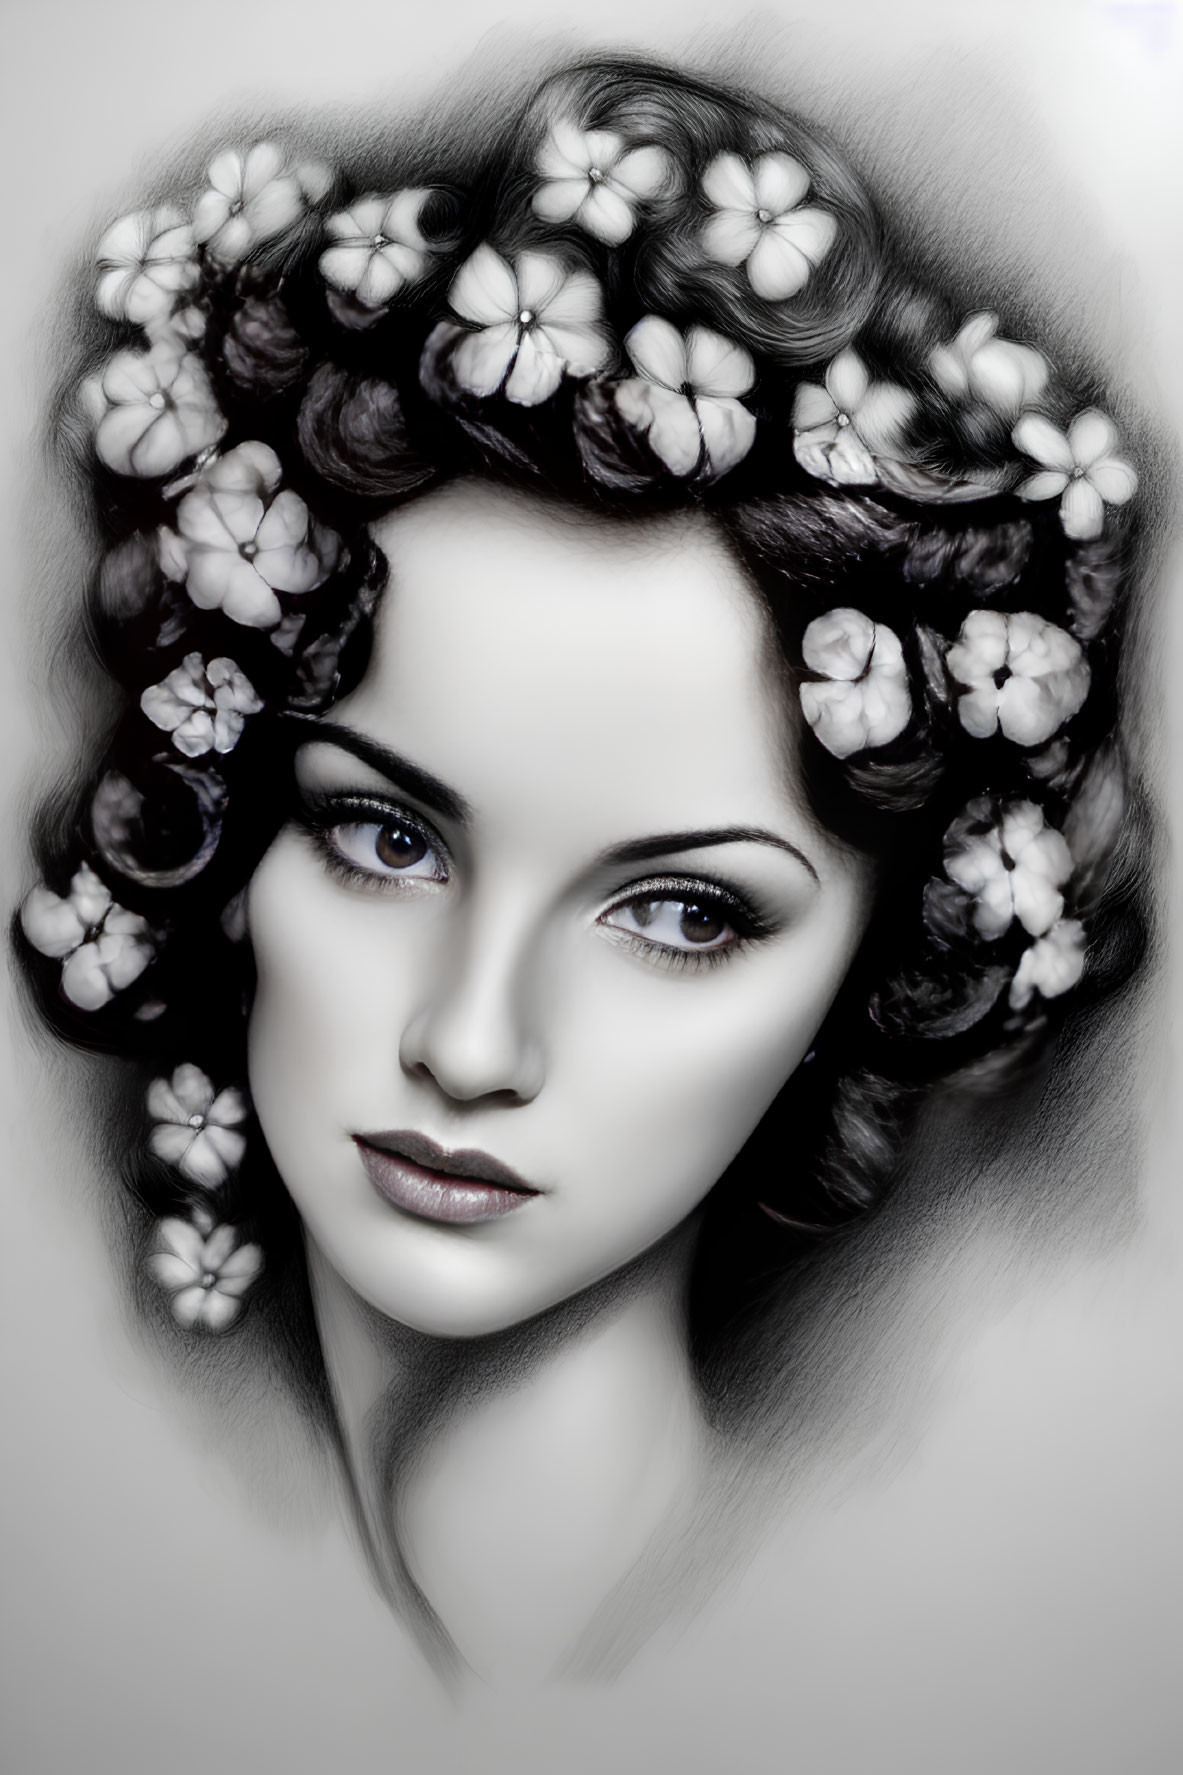 Monochrome artistic portrait of a woman with flowers in her hair